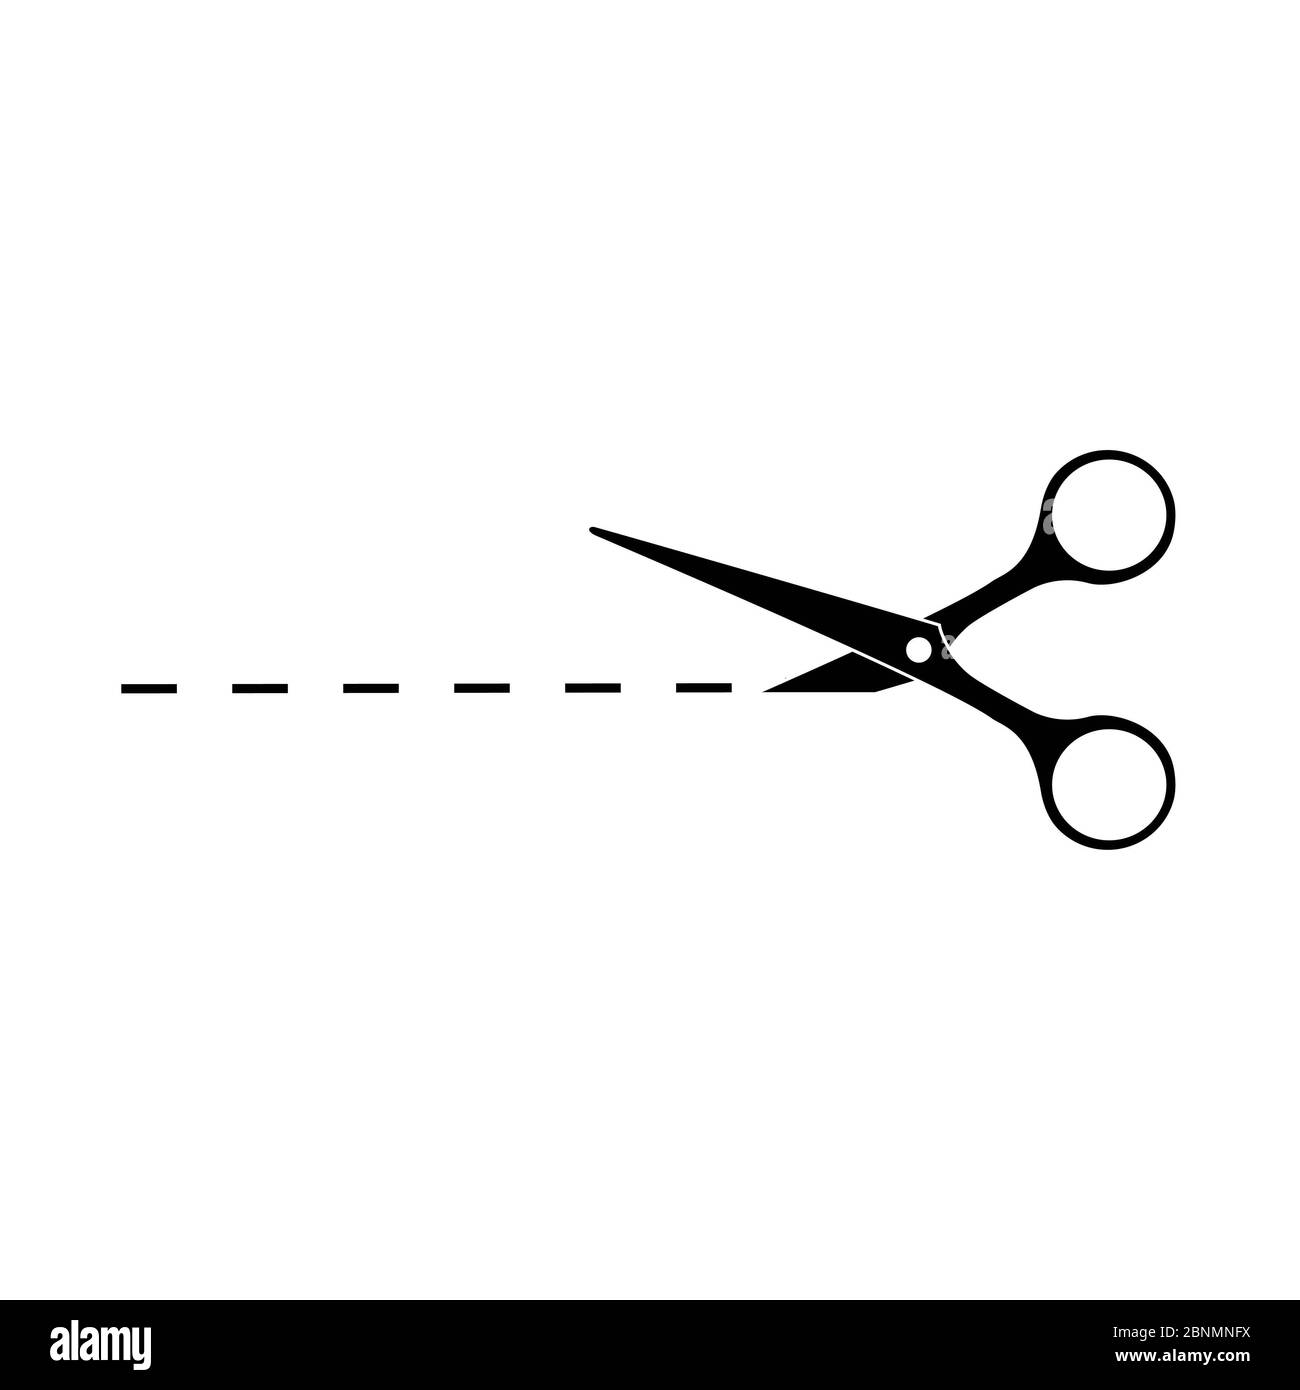 Scissors Cut Lines Icon Badge Place Cutting Stock Vector by ©arhimicrostok  239331766